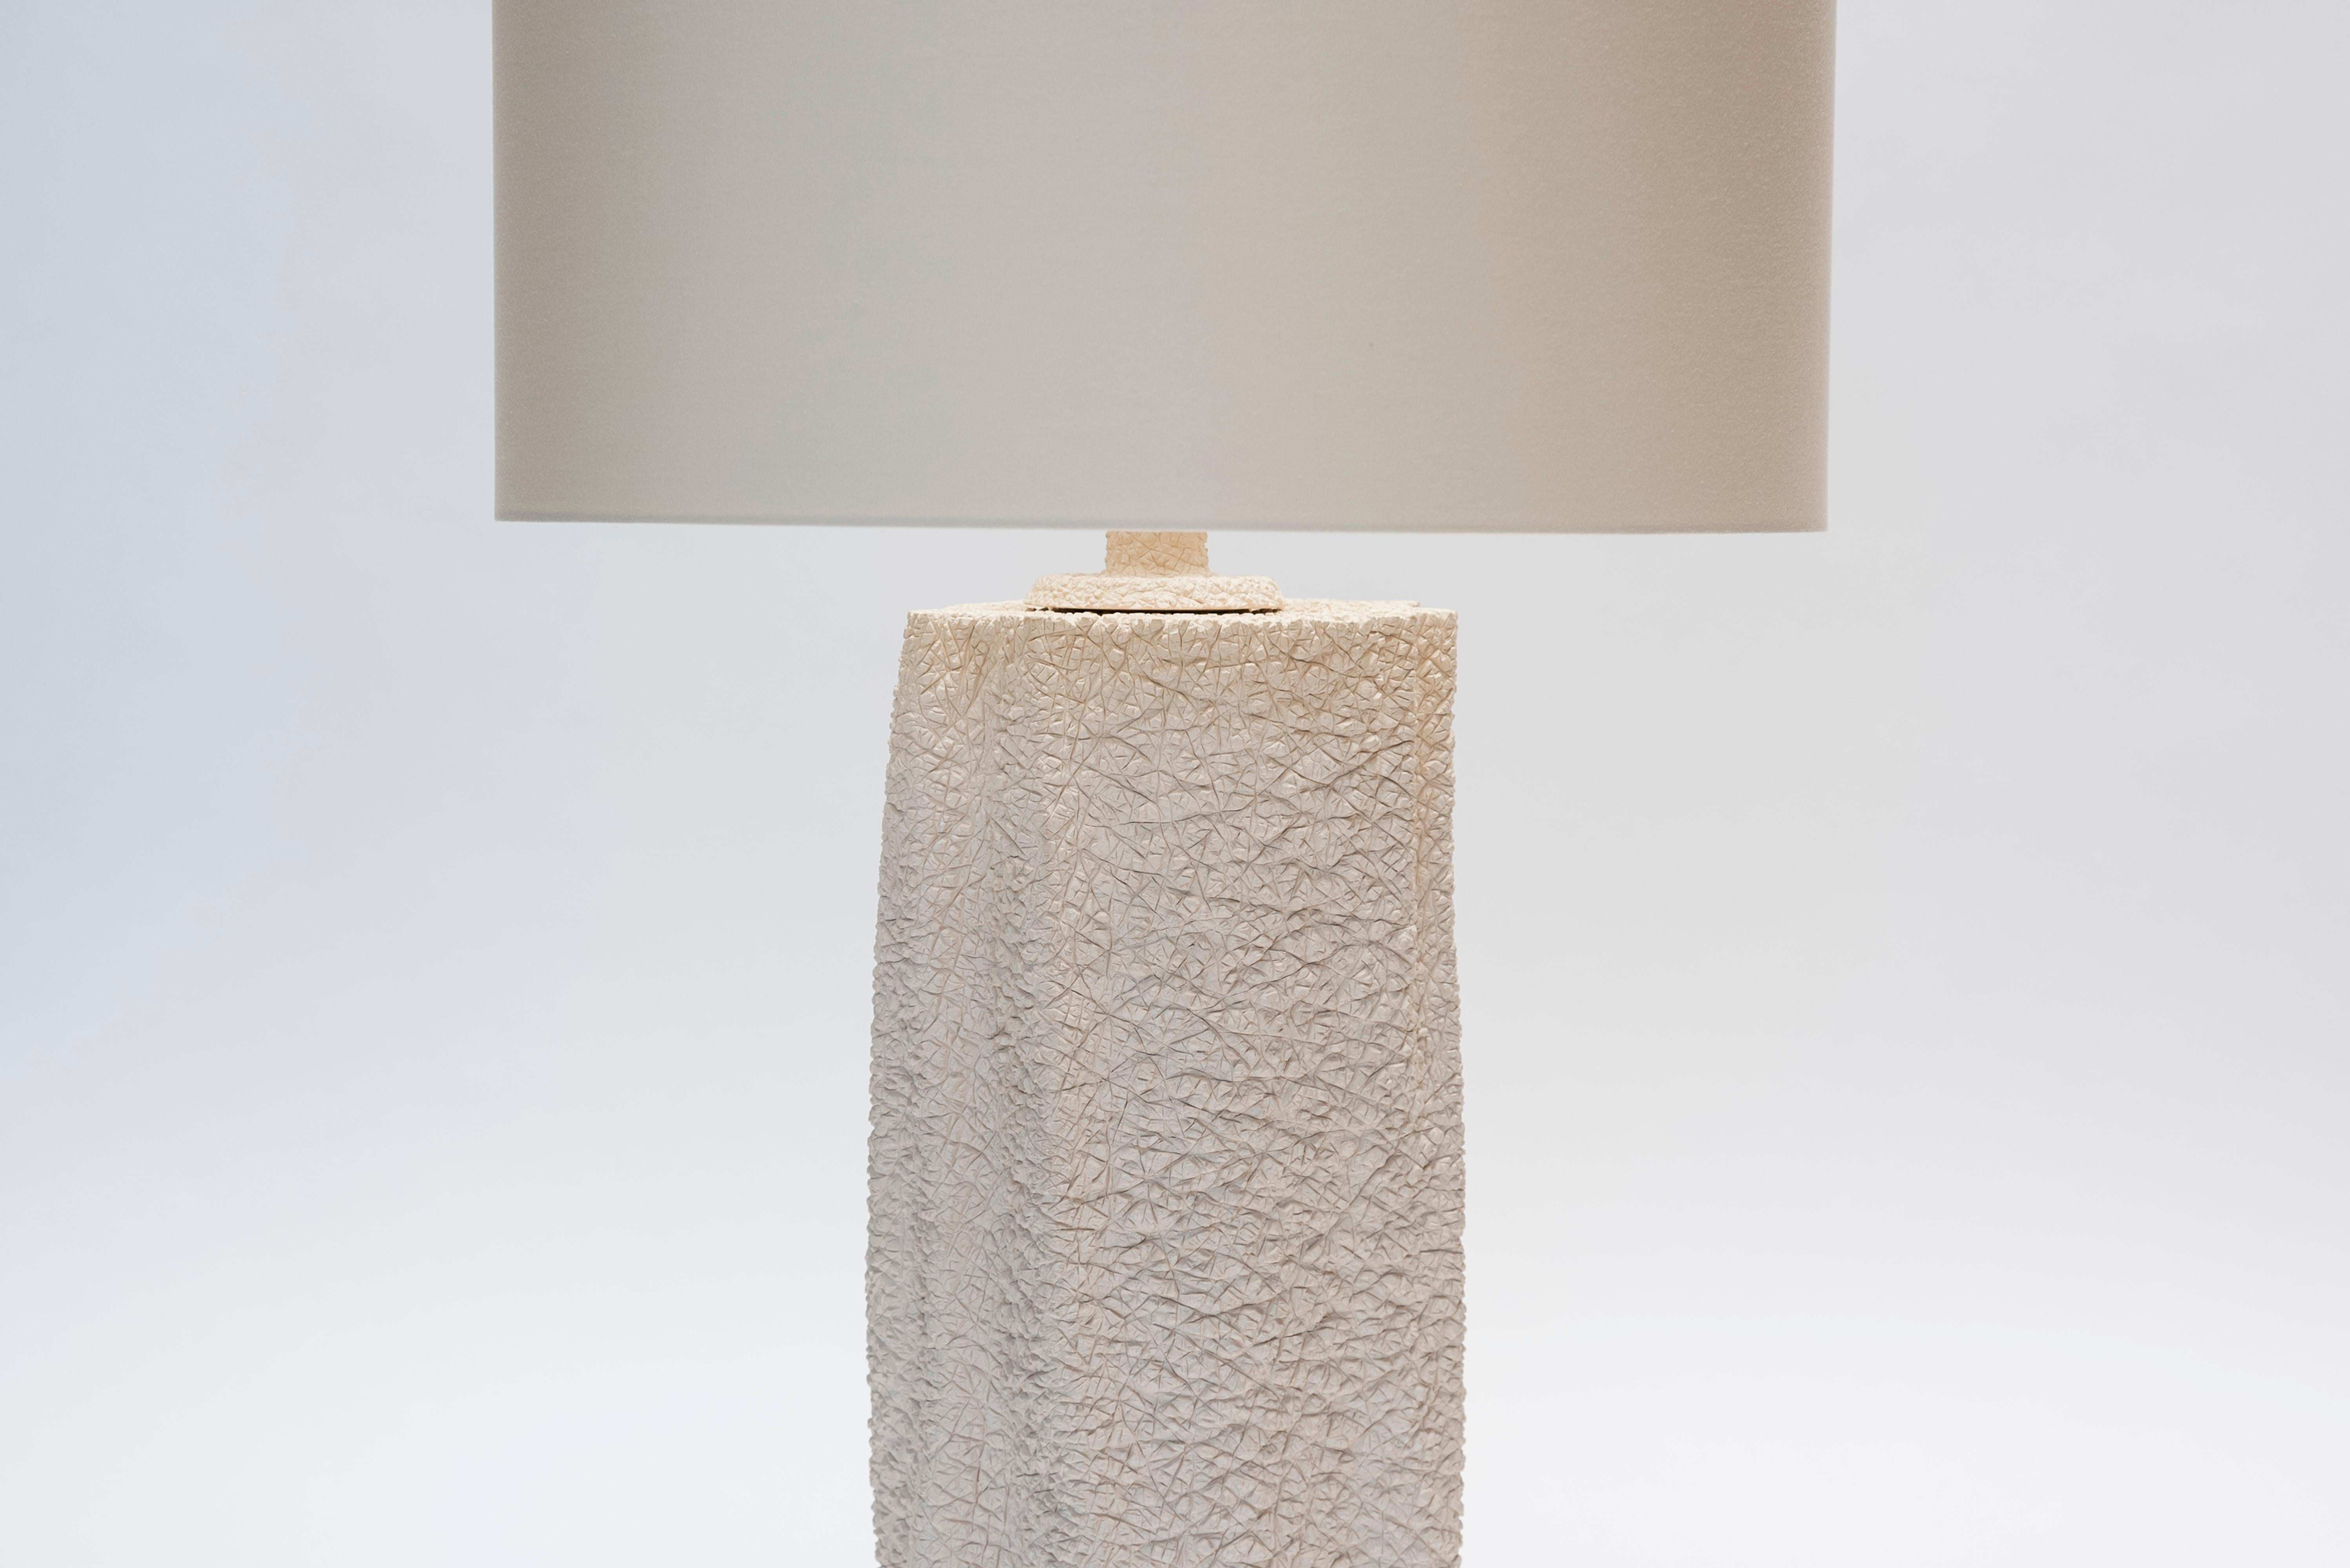 Pair of french modern table lamps in natural ceramic, with an interesting texture mixing tree bark and reptile skin.